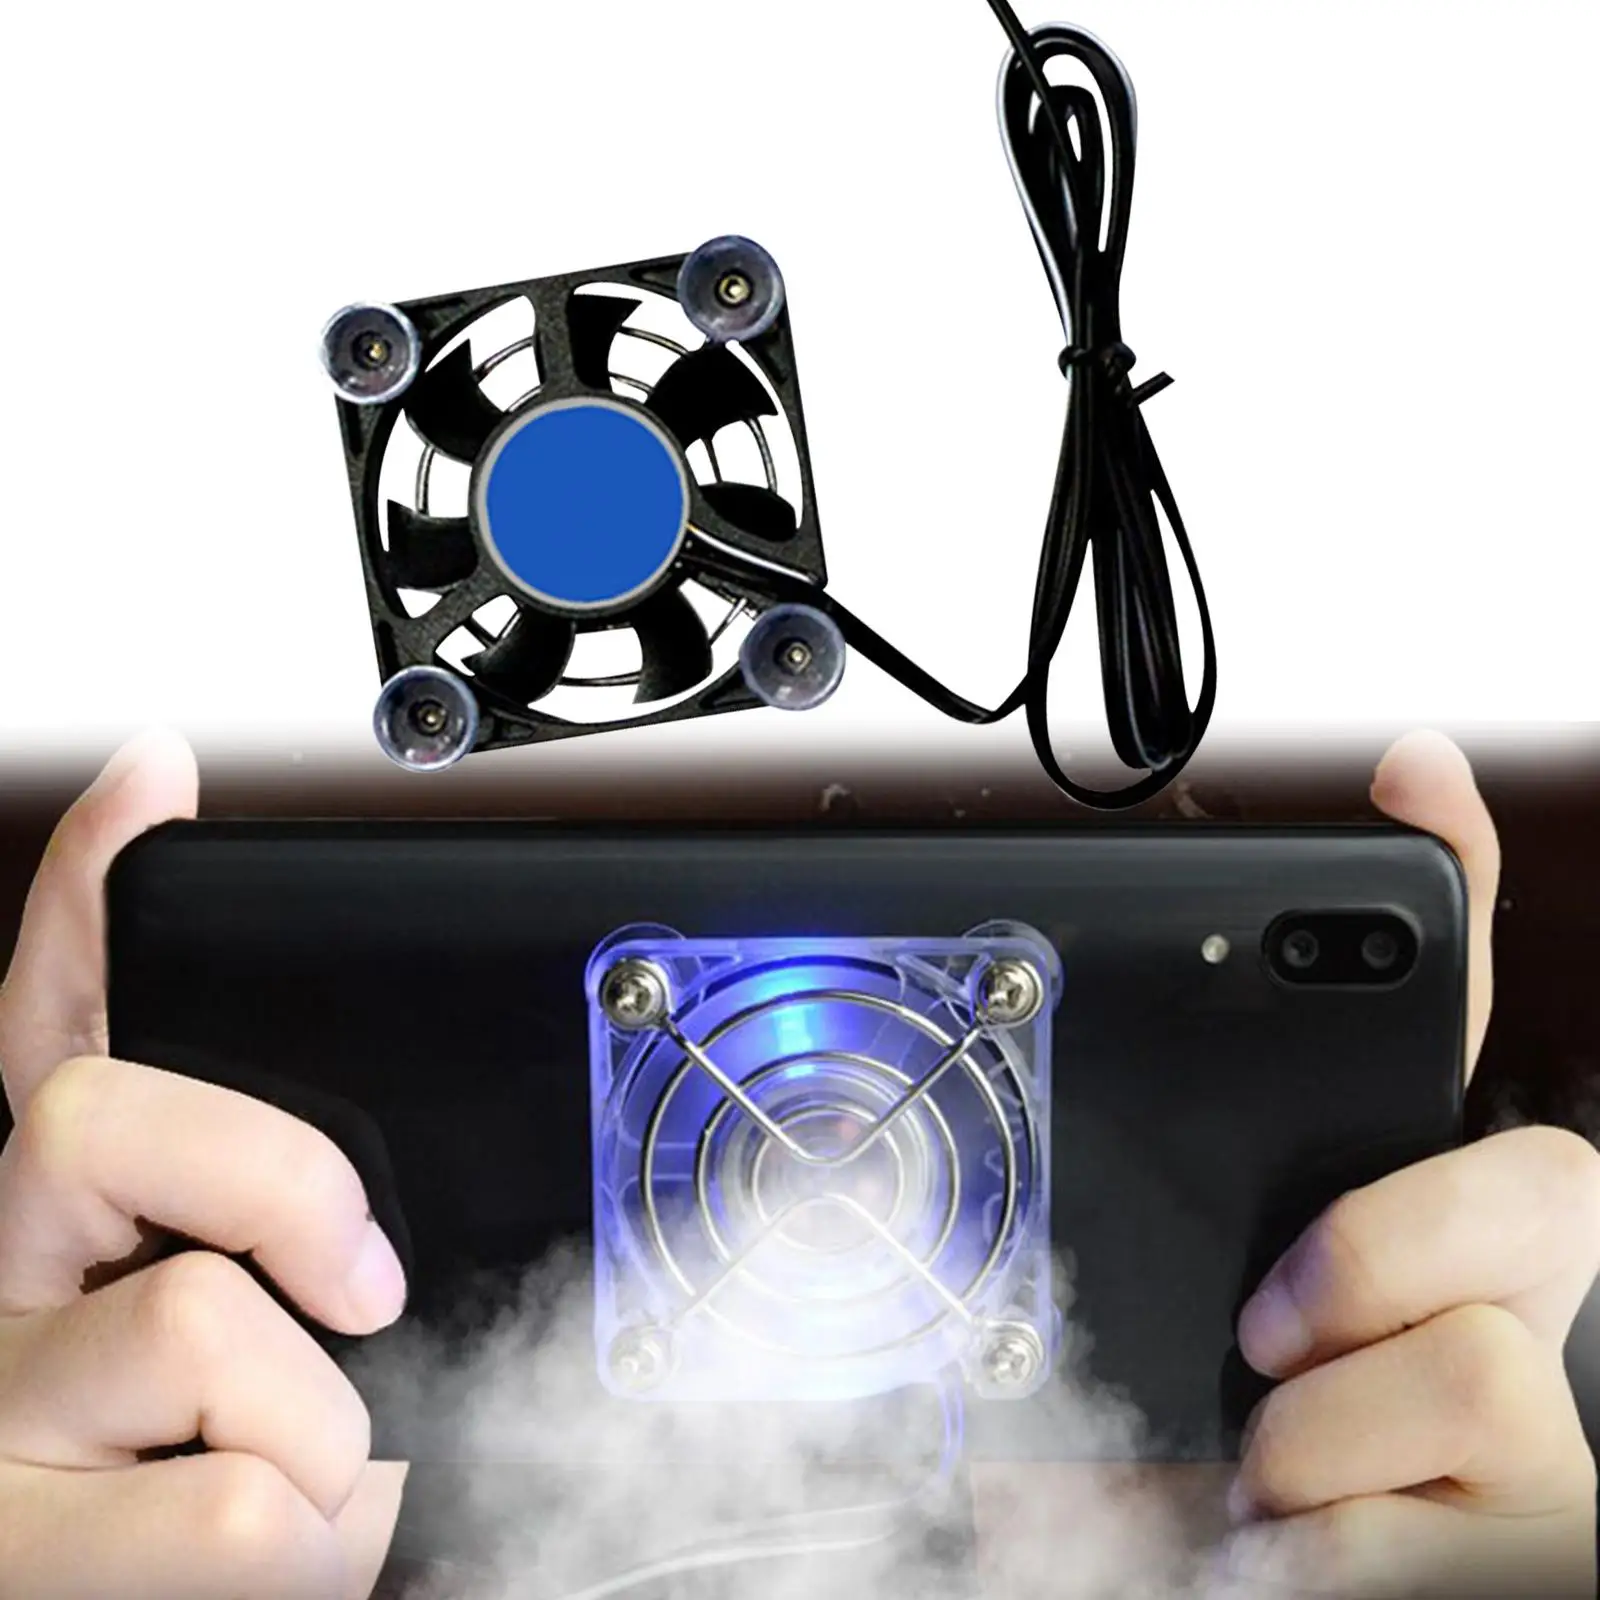 Phone Cooling Fan Cooler with Suction Cup Mini Cellphone Radiator for Smartphones Live Watching Movies Mobile Gaming